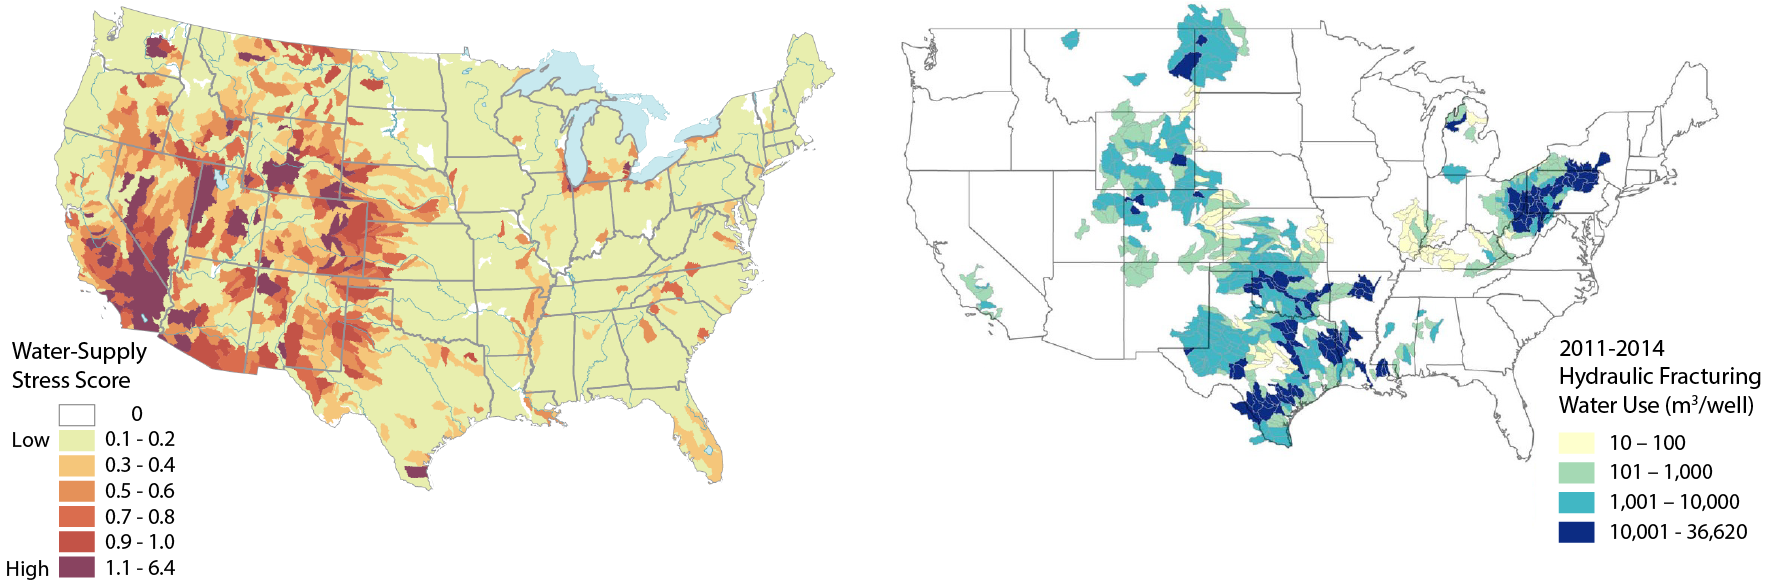 Left: Water stress in the U.S. - in brown areas of the map, total water demand for all uses ranges from 40-80 percent of available supply. Right: Hydraulic fracturing water use per well across the country.